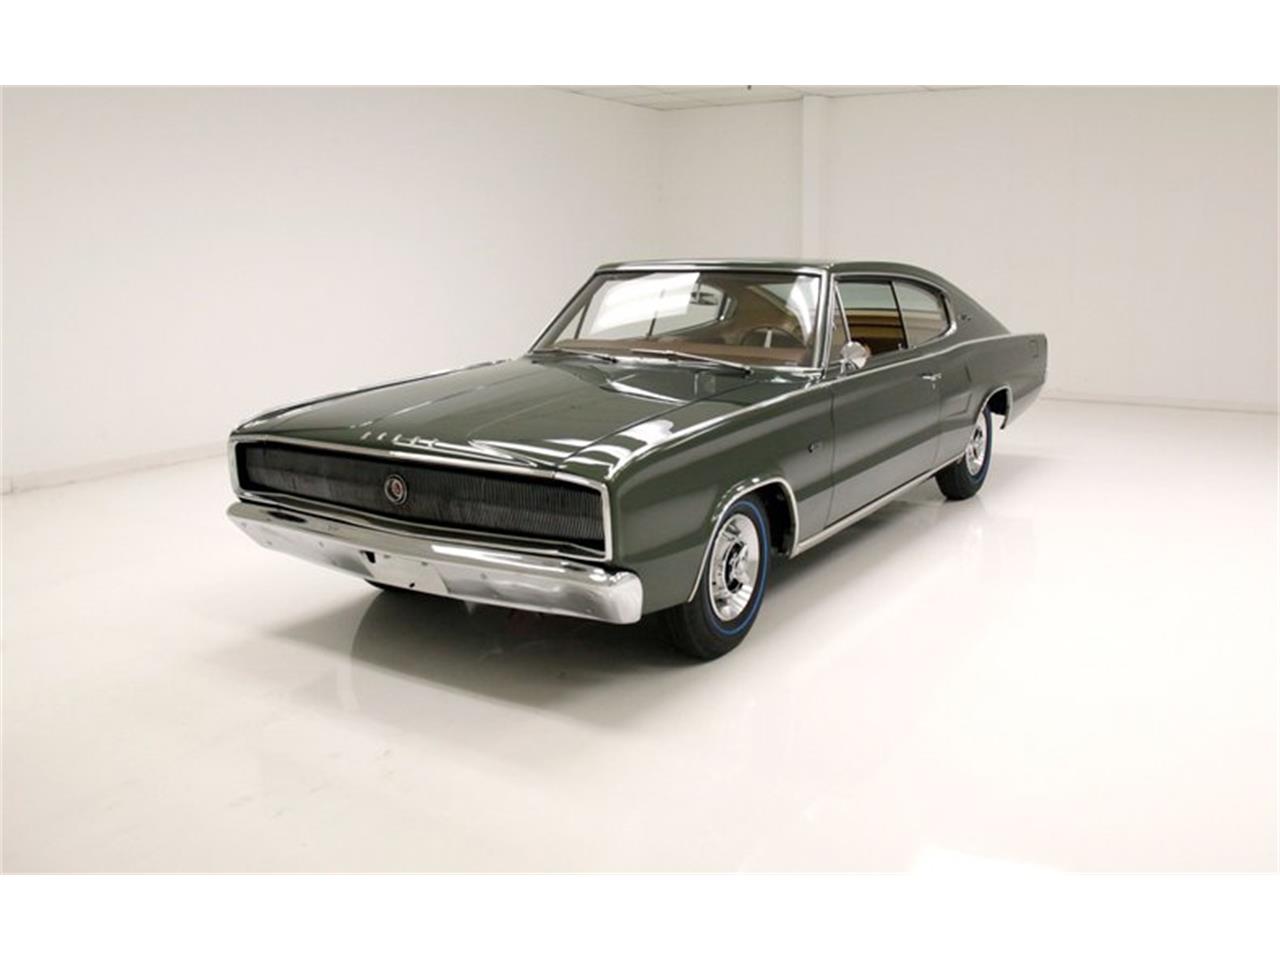 for sale 1966 dodge charger in morgantown, pennsylvania cars - morgantown, pa at geebo